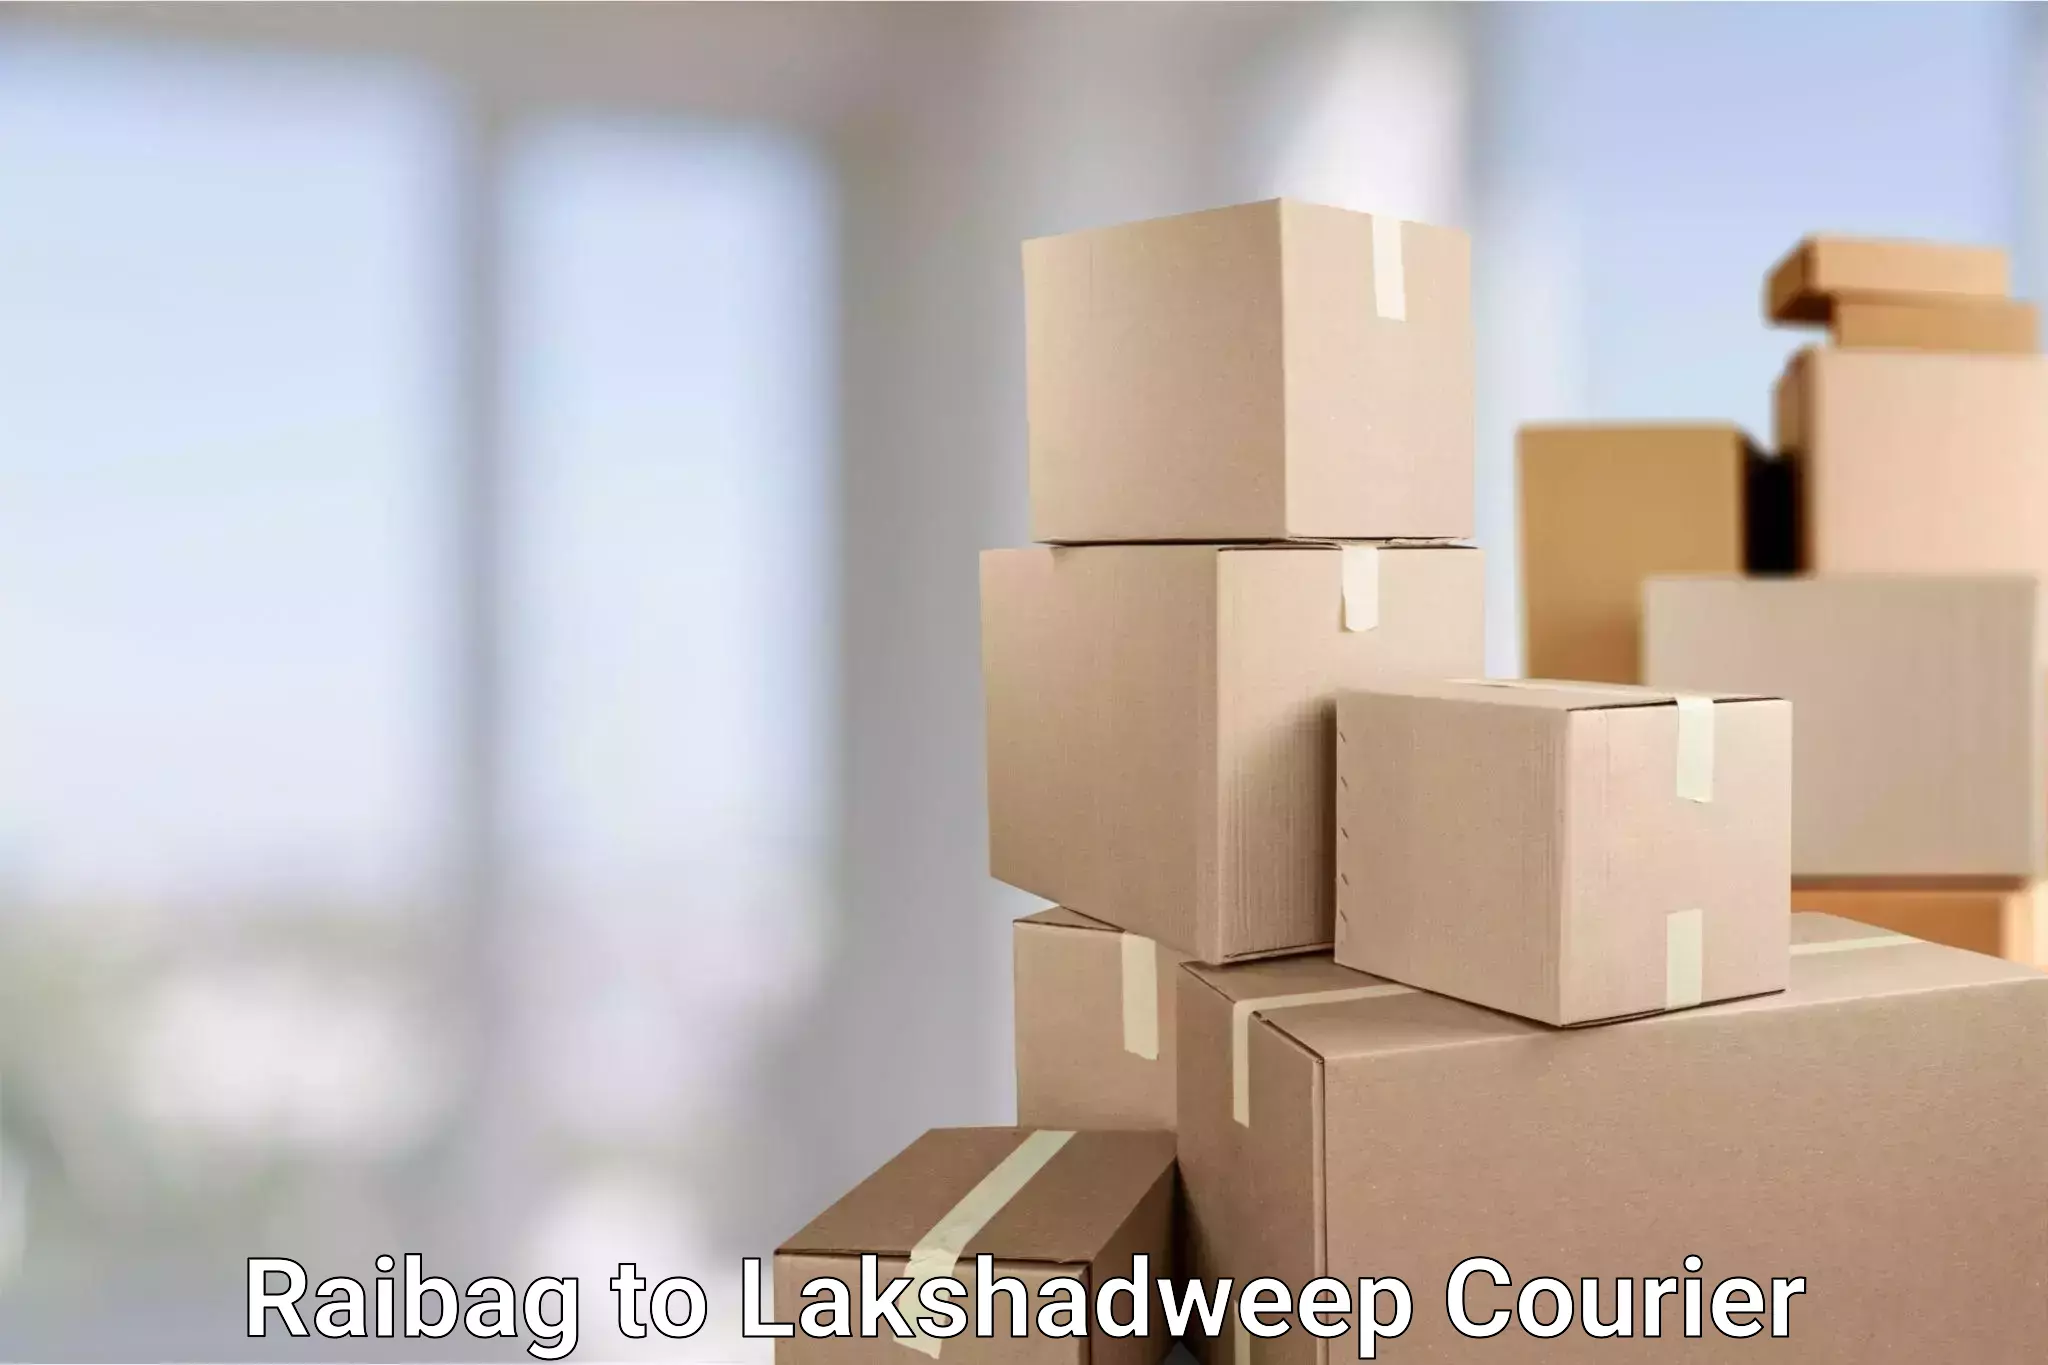 Subscription-based courier Raibag to Lakshadweep